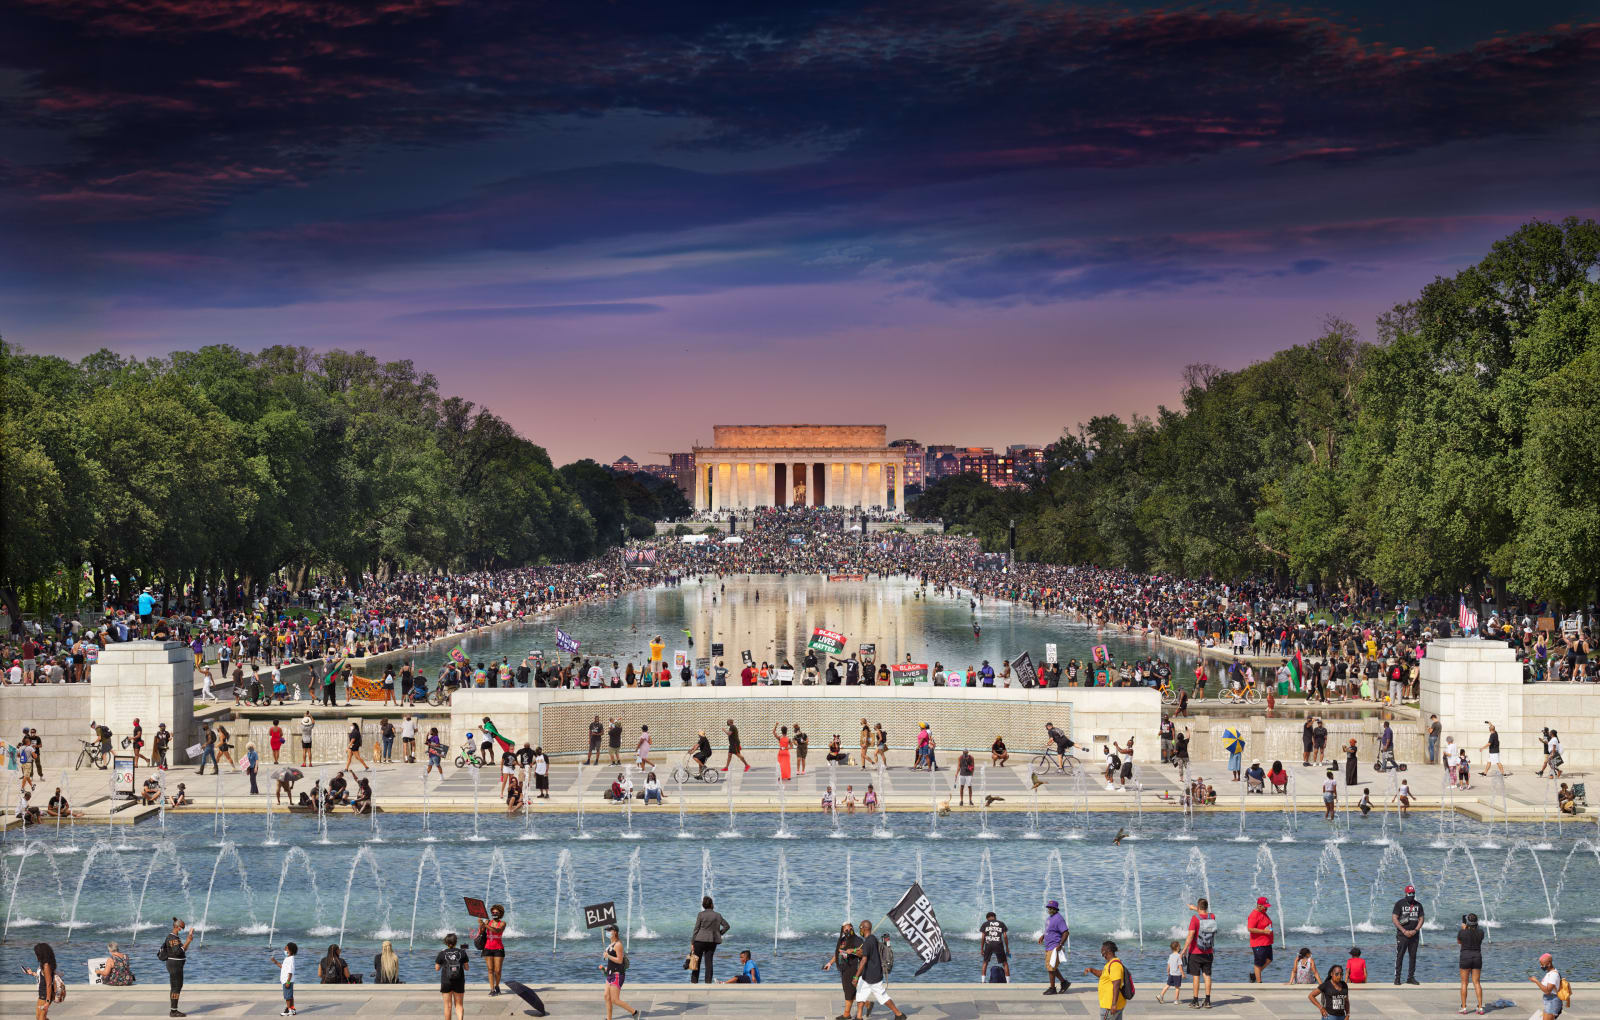 Stephen Wilkes, Commitment March, Washington DC, Day to Night™, 2020